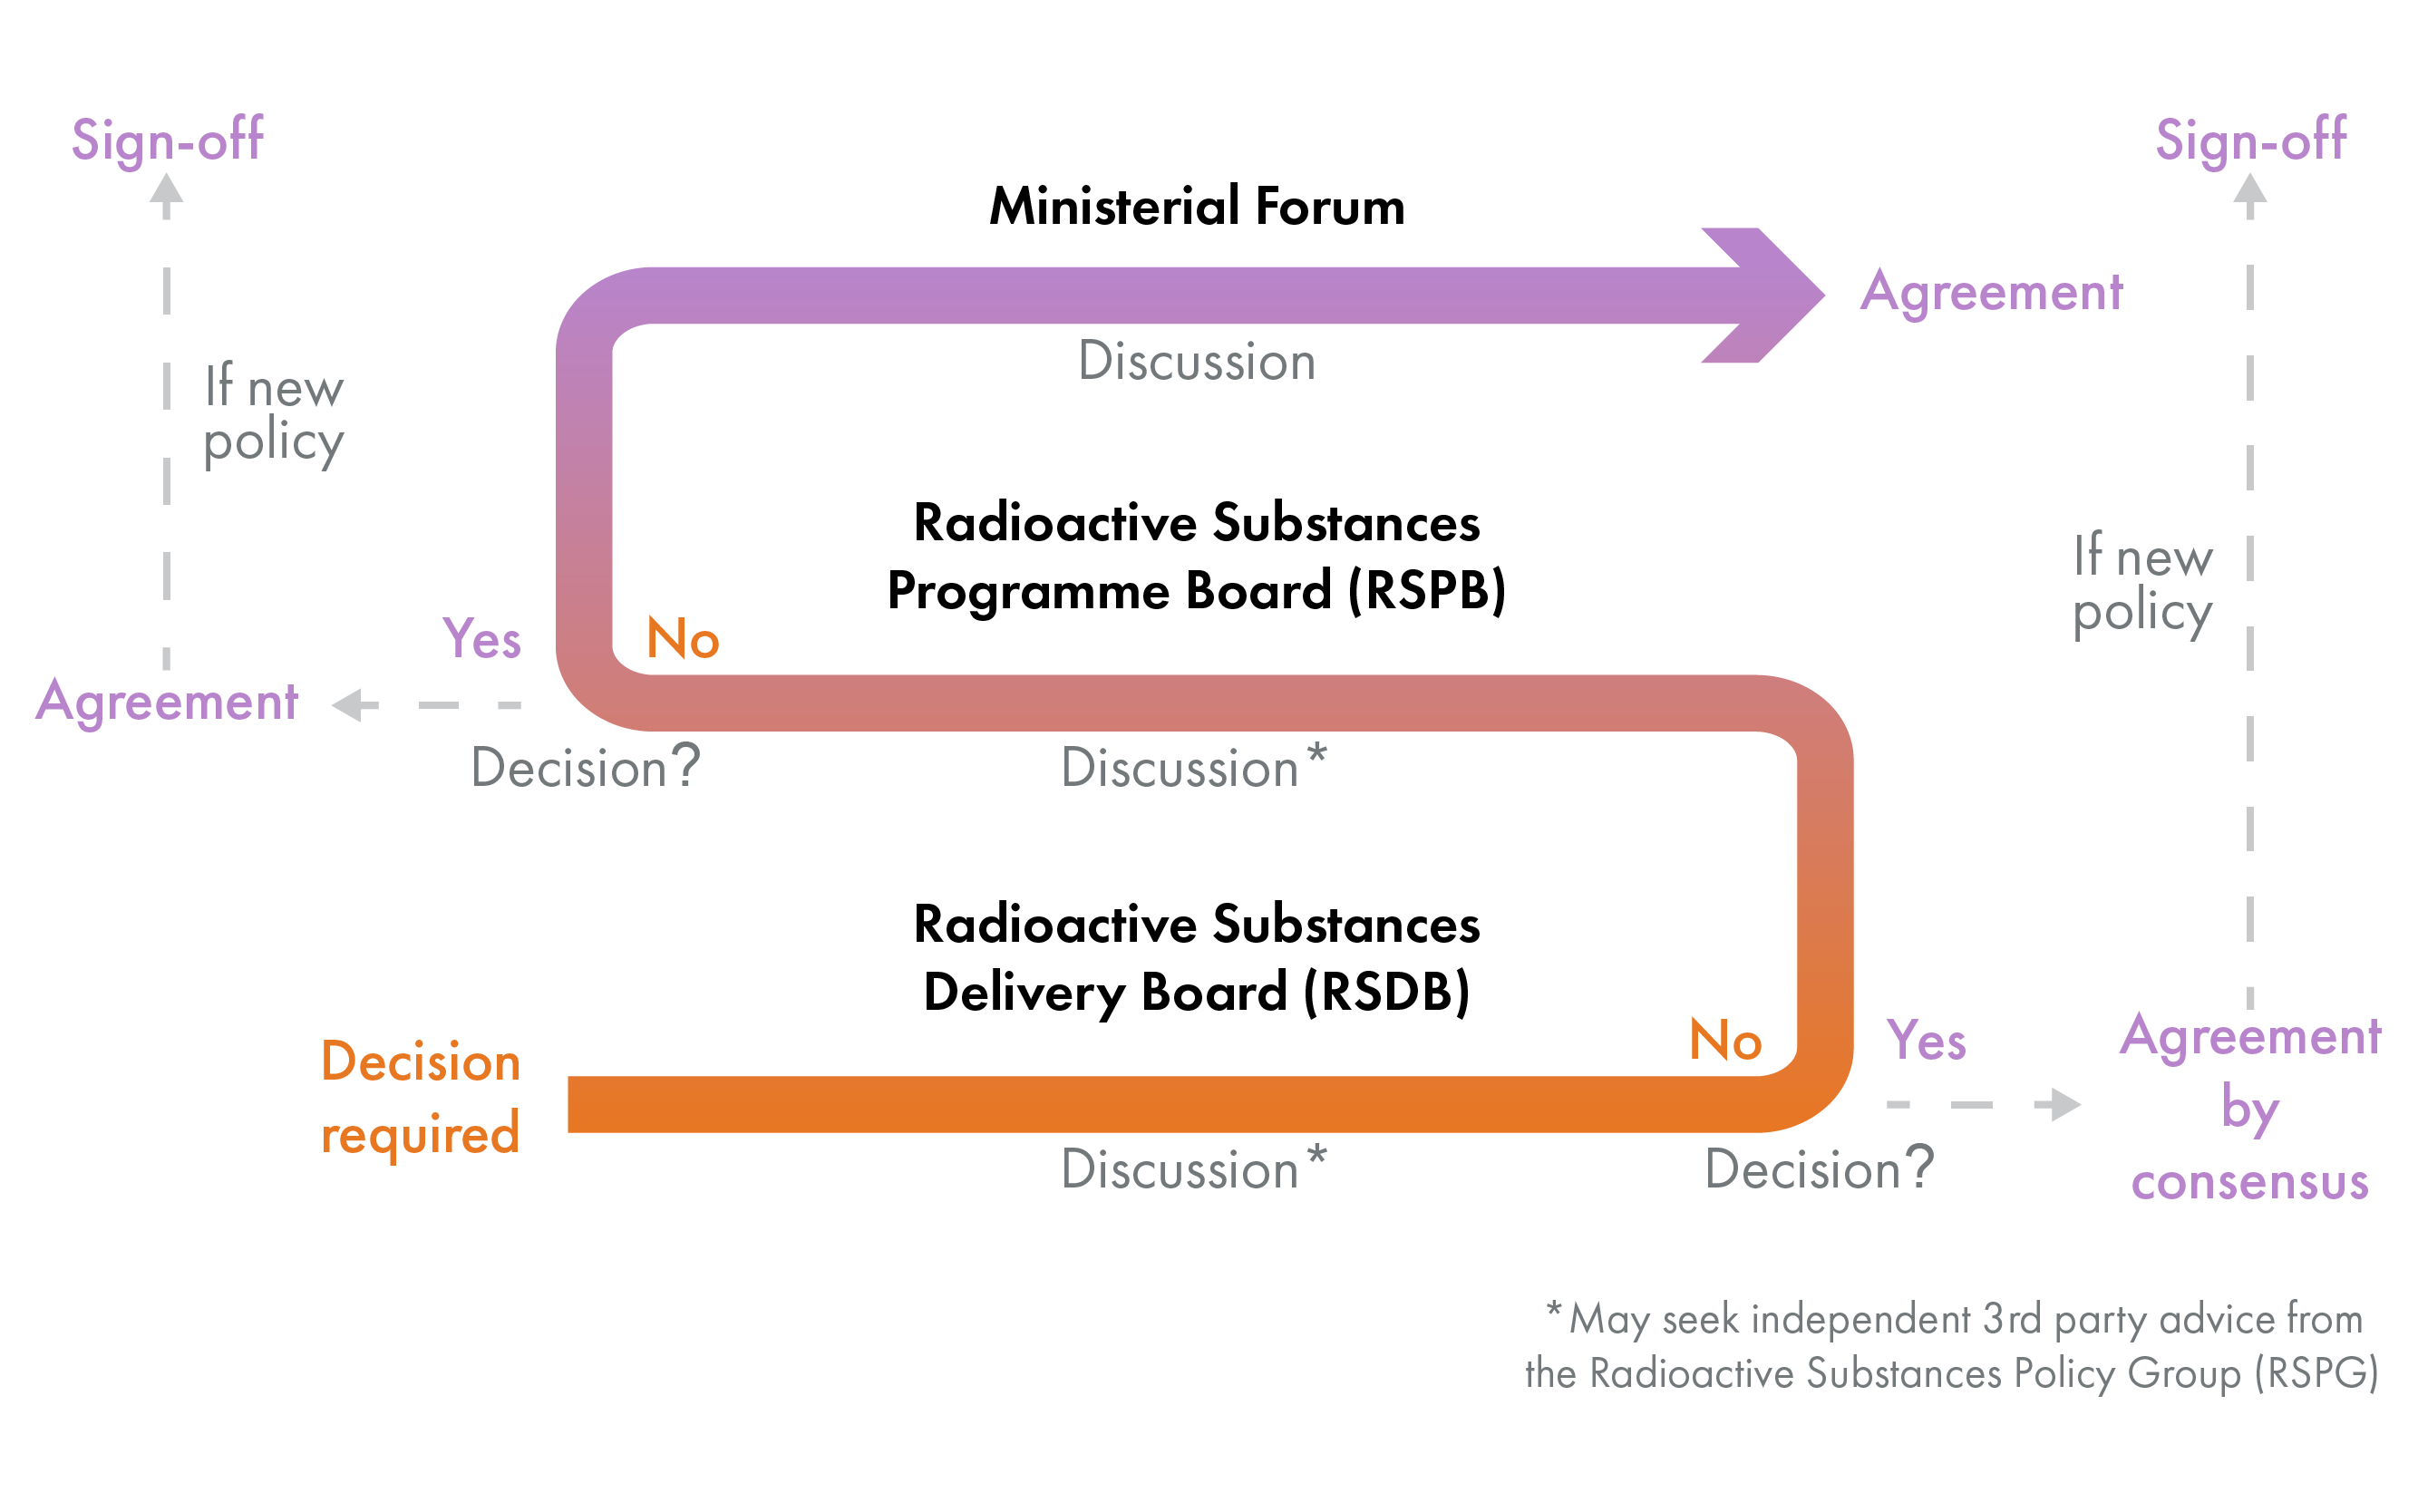 The diagram shows the decision making process within the framework.